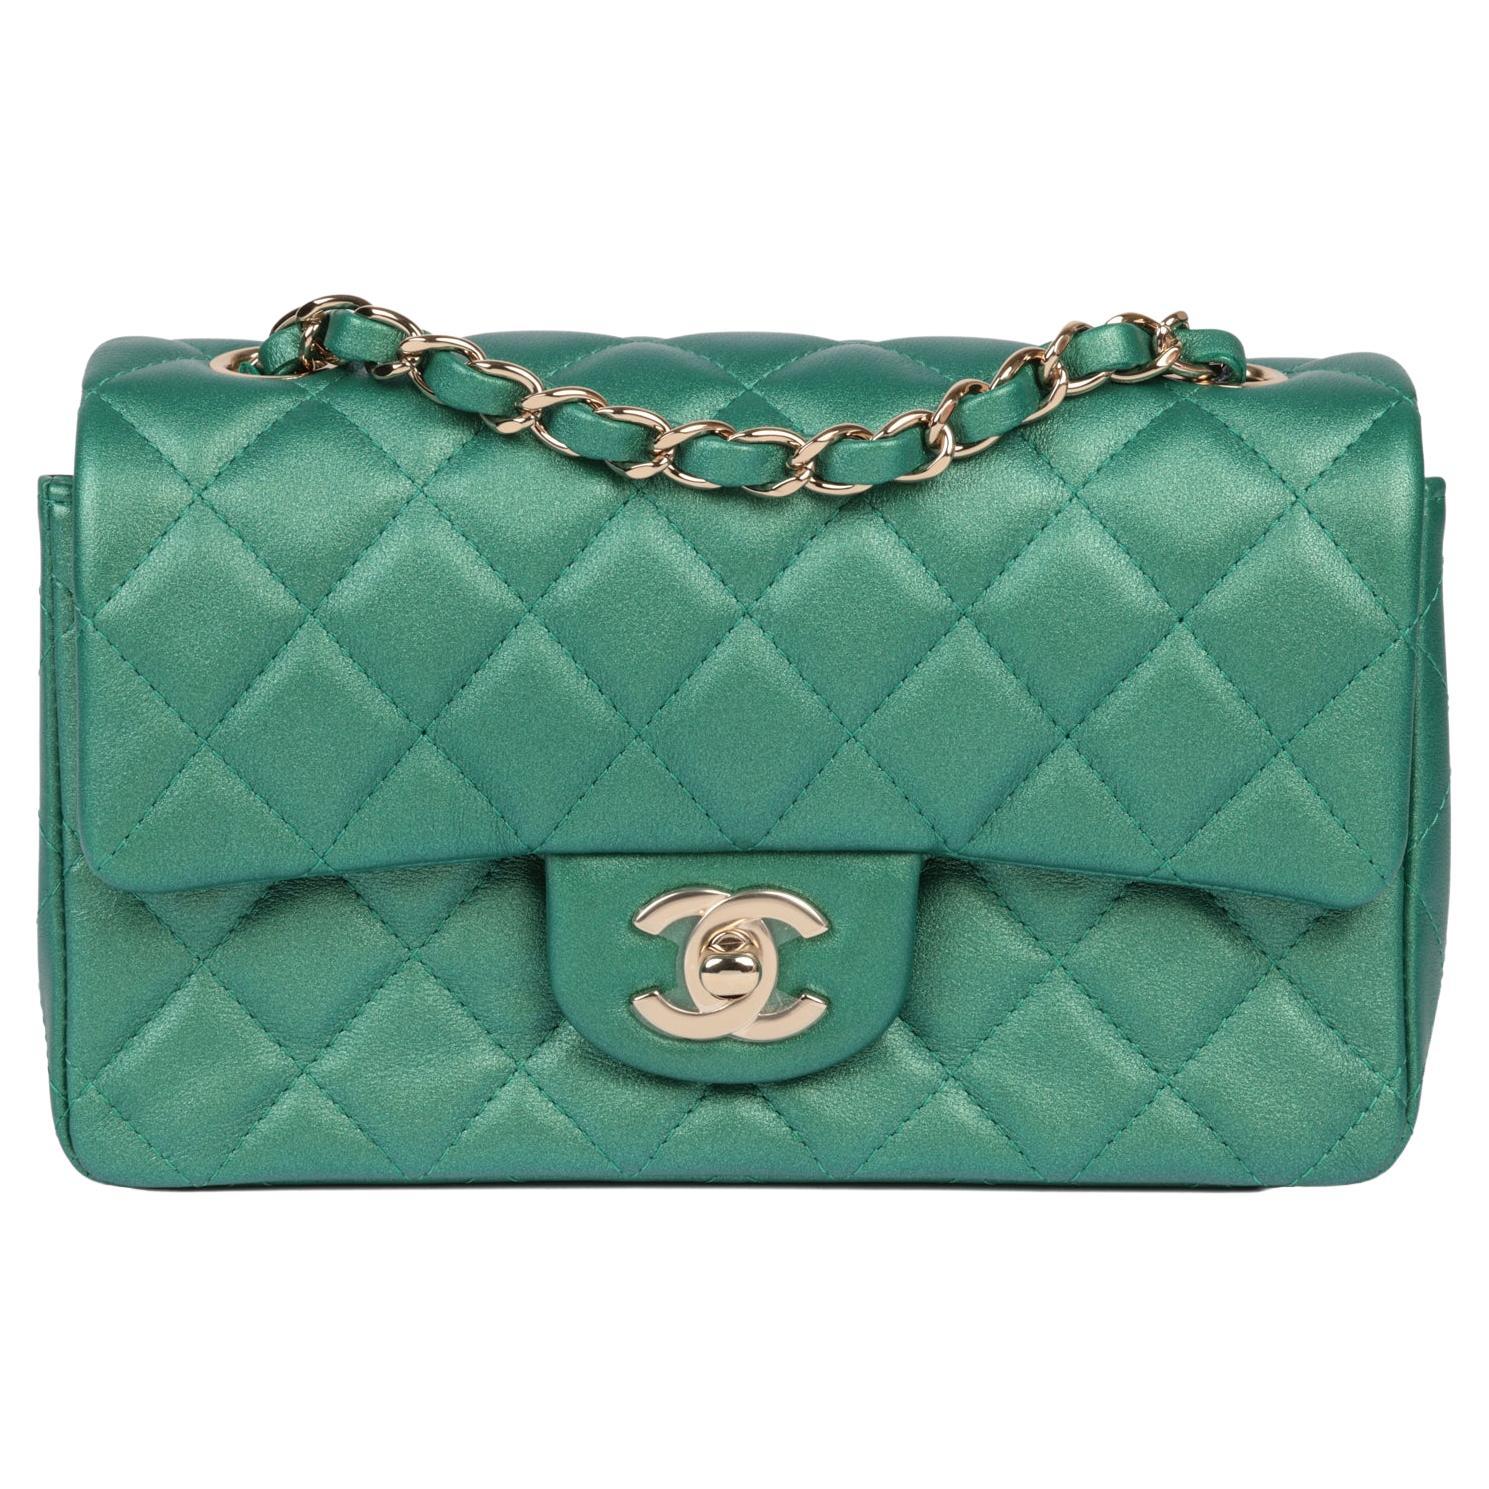 Chanel Green Iridescent Quilted Lambskin Rectangular Mini Flap Bag For Sale